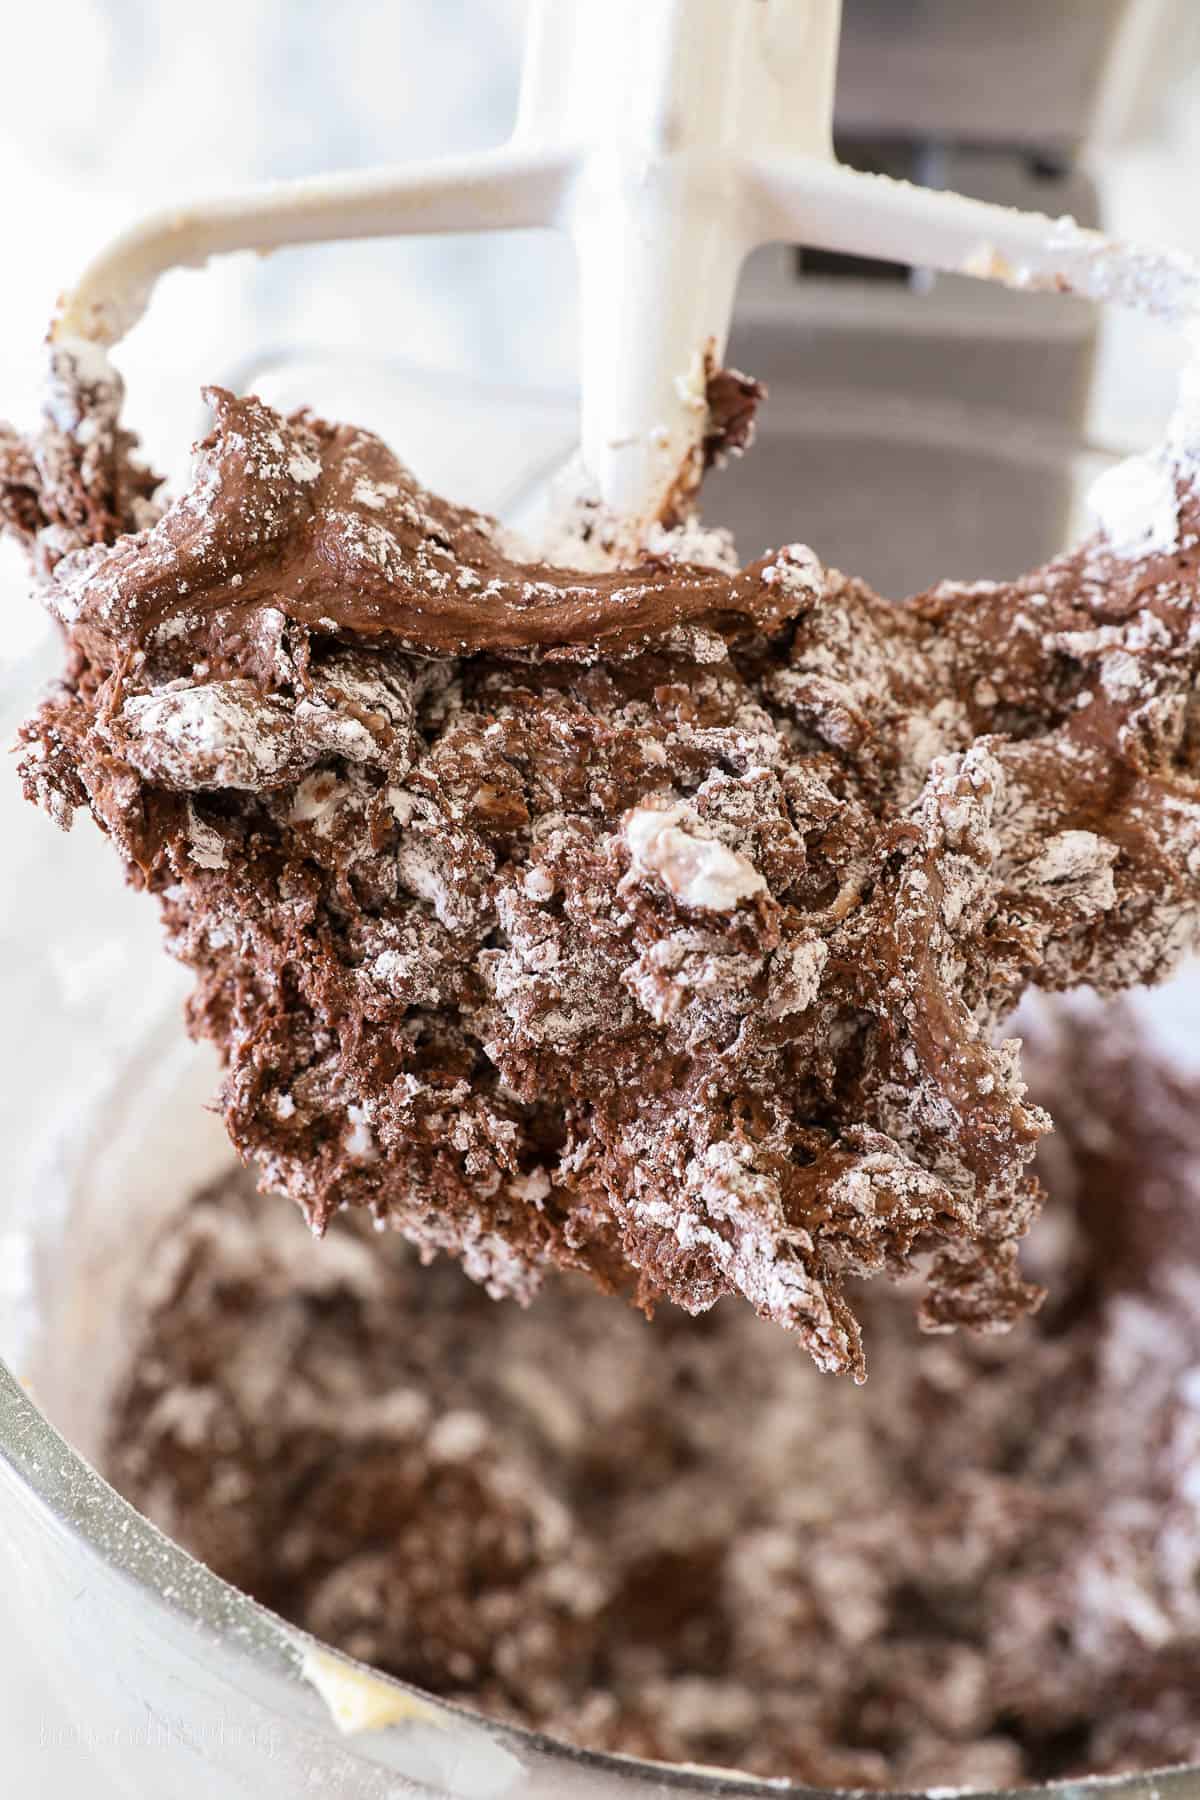 A stand mixer attachment coated in partially mixed chocolate frosting and powdered sugar.